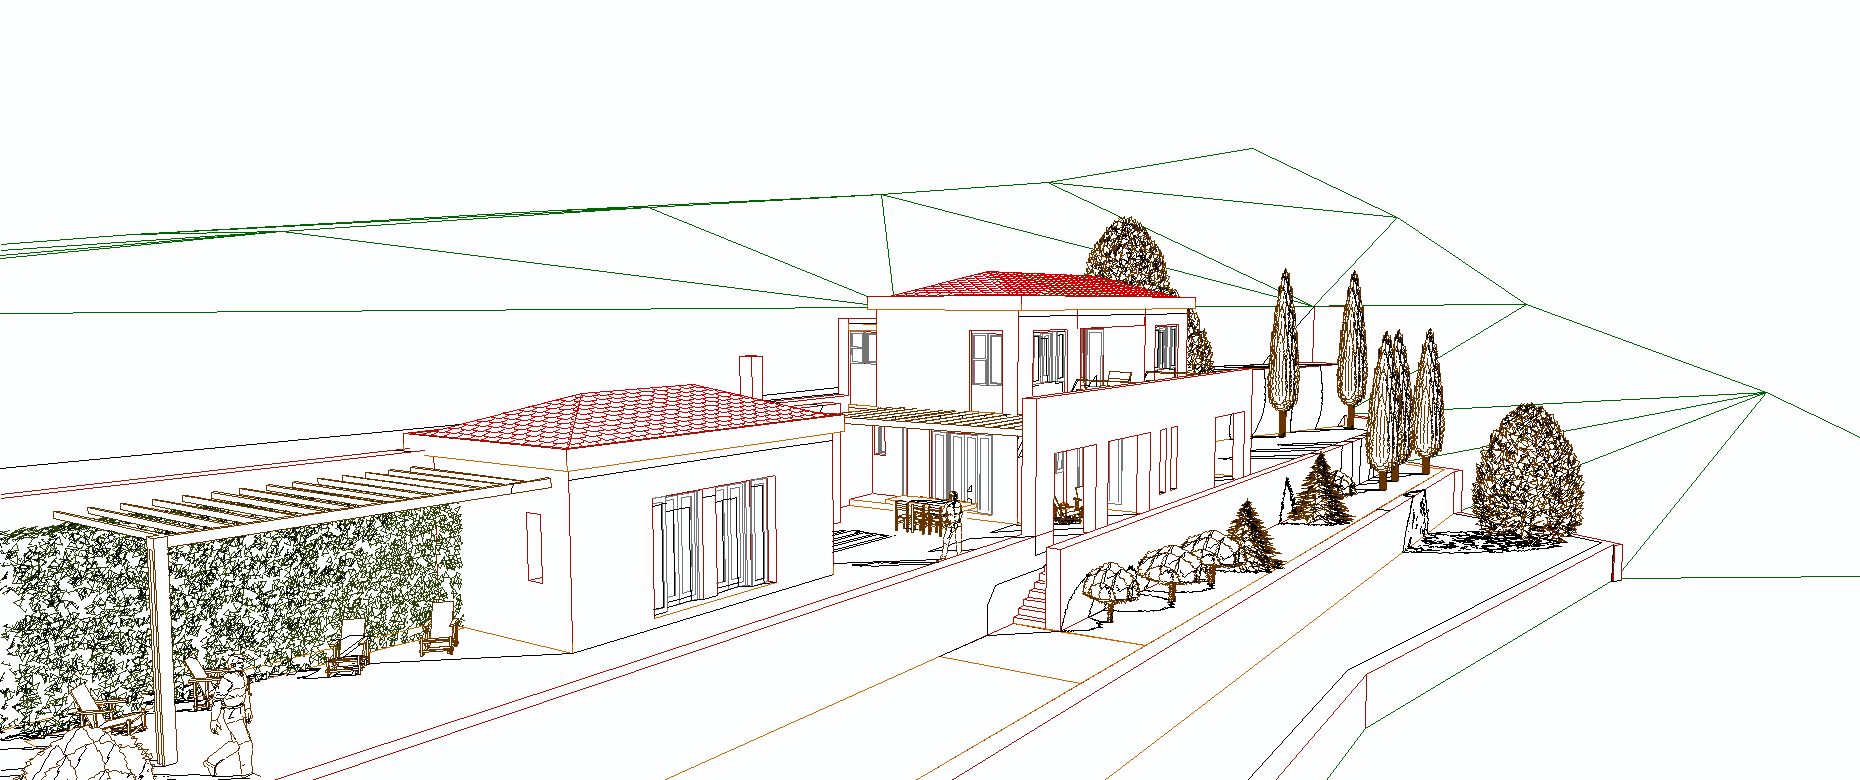 Digital house plans from land for sale Ithaca Greece Perachori